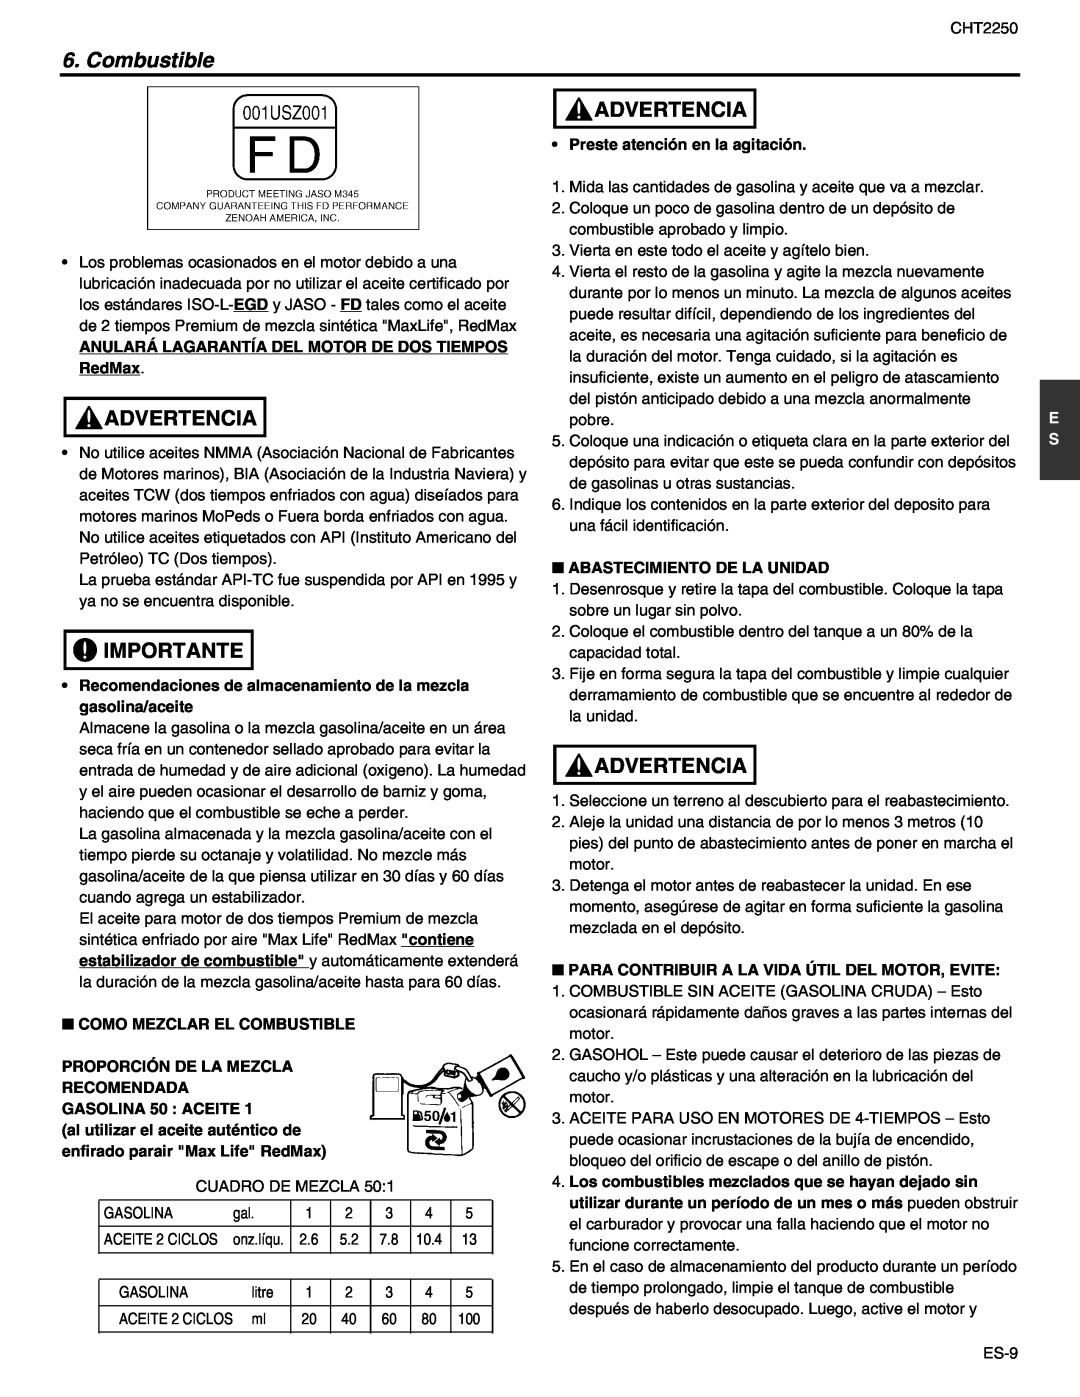 RedMax CHT2250 manual Combustible, Advertencia, Importante 